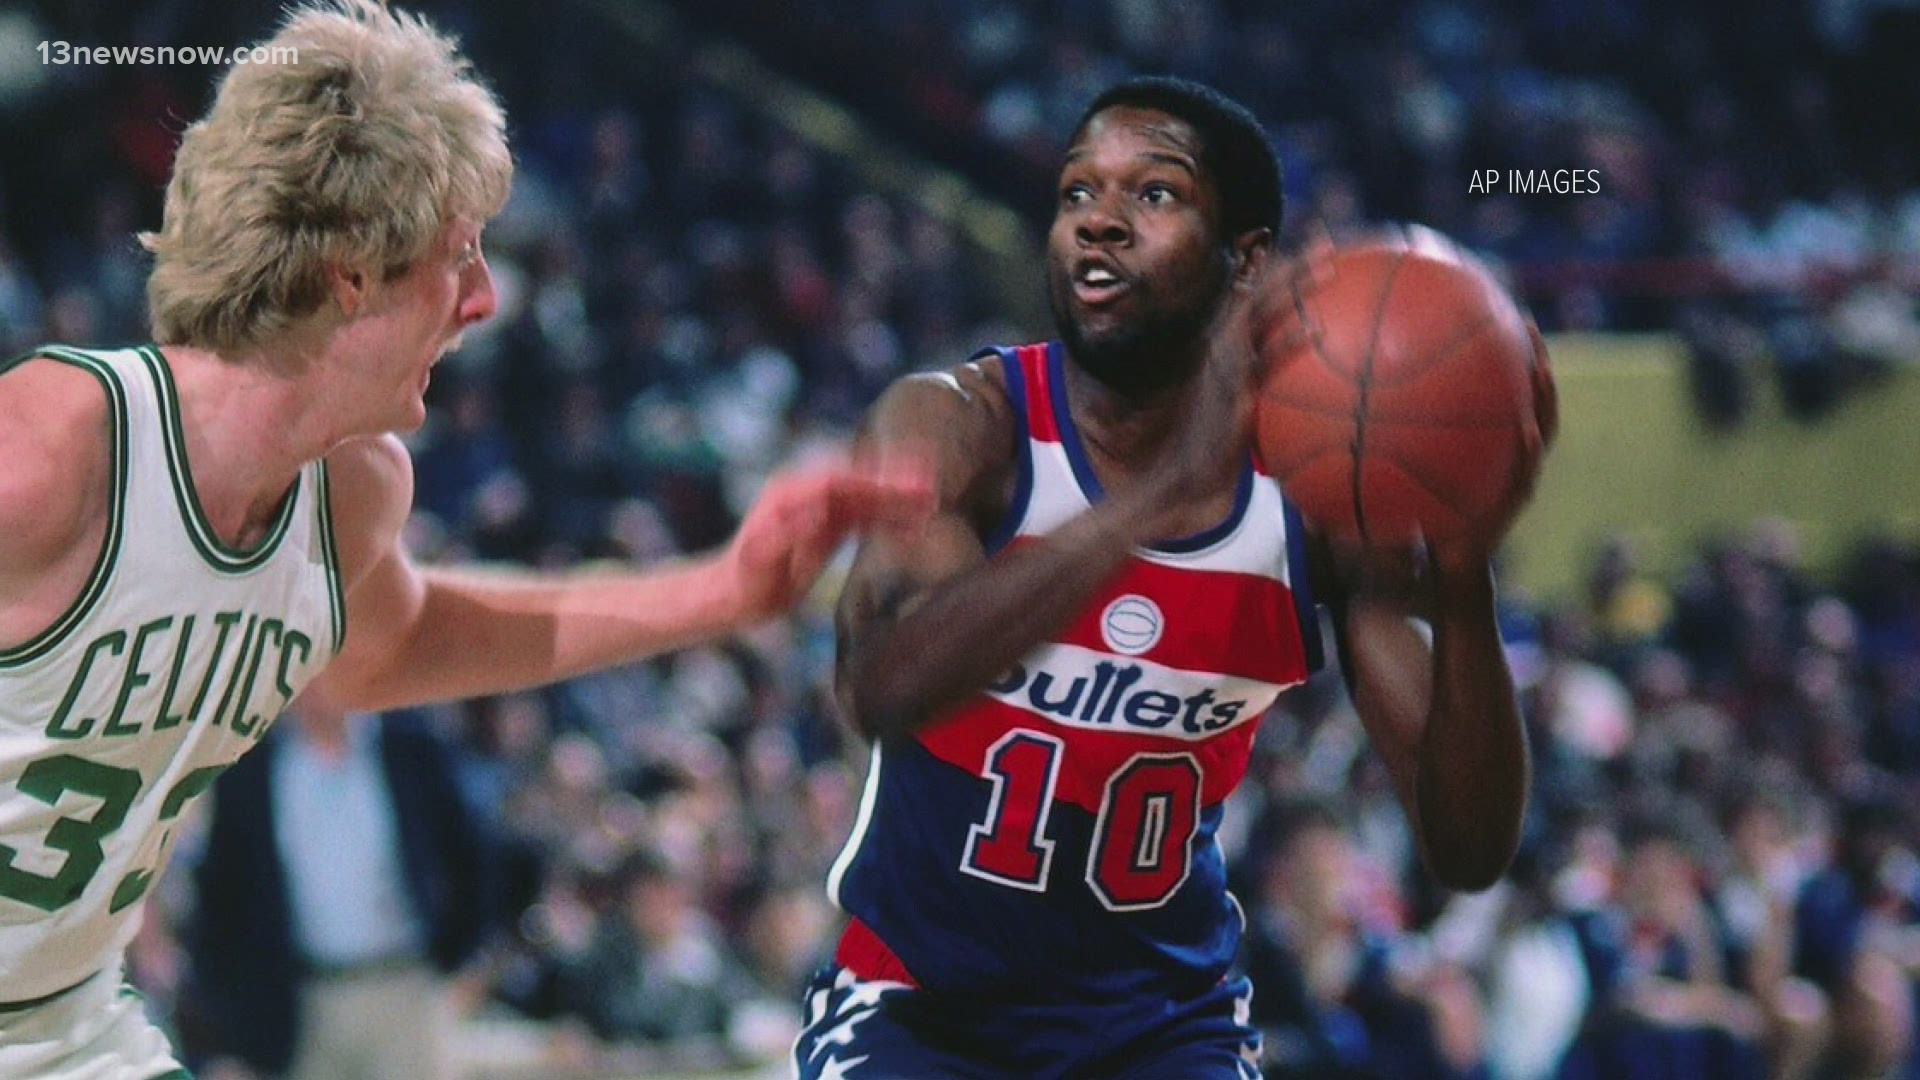 In his 13 year career, Bob Dandridge was a 2-time NBA Champion and a 4-time all-star.